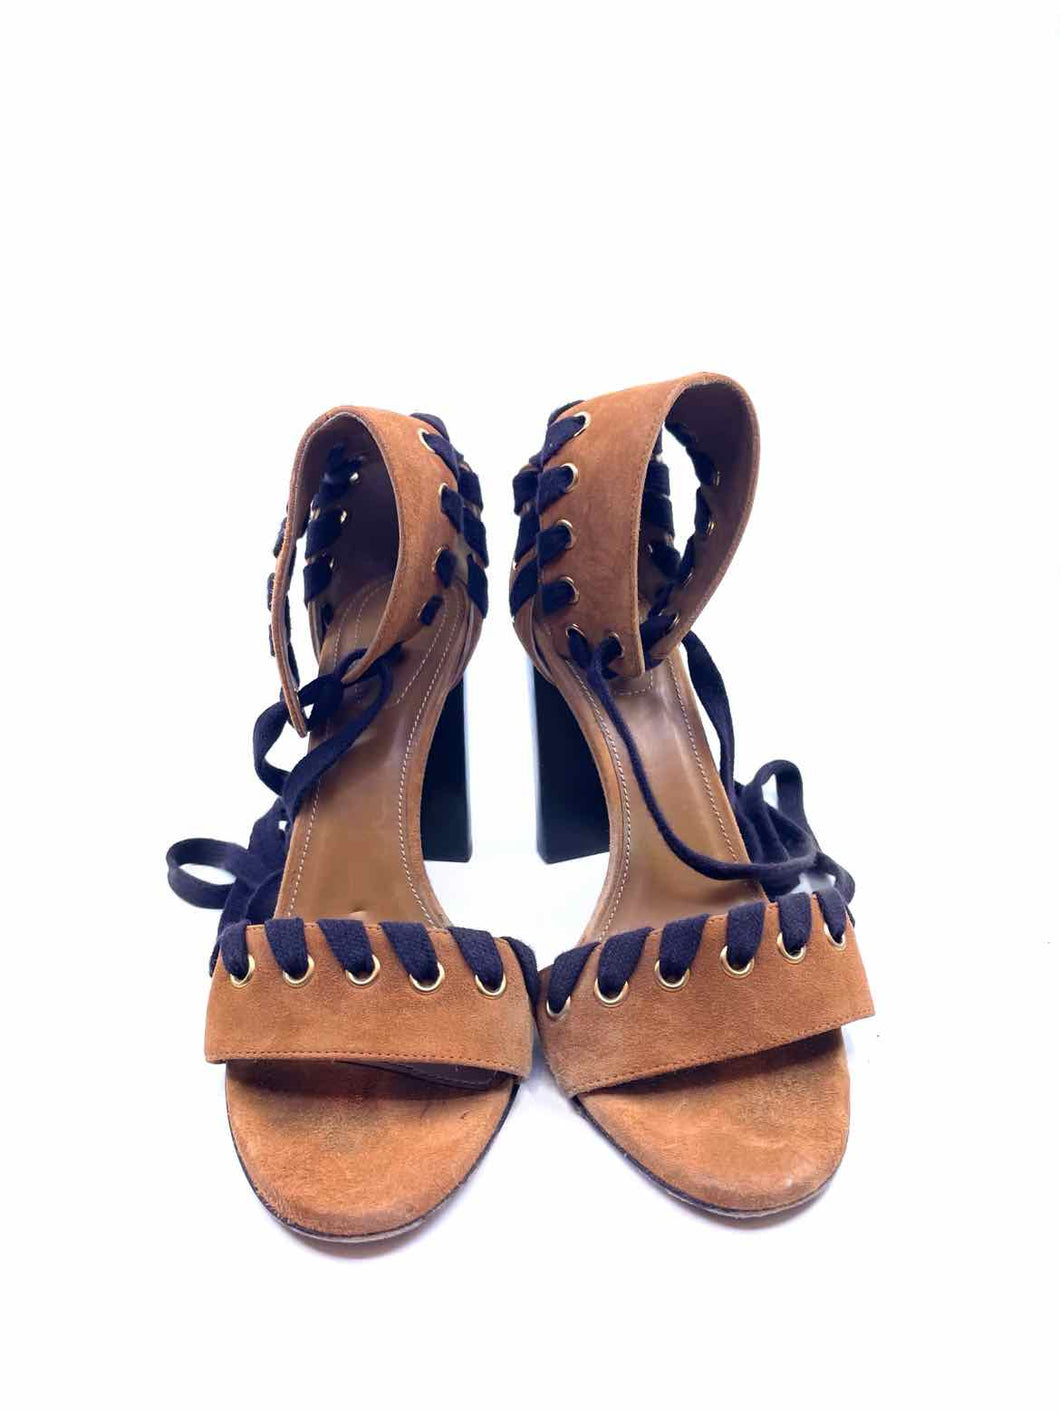 CHLOE Size 7.5 Camel, Brown Suede Solid Sandals